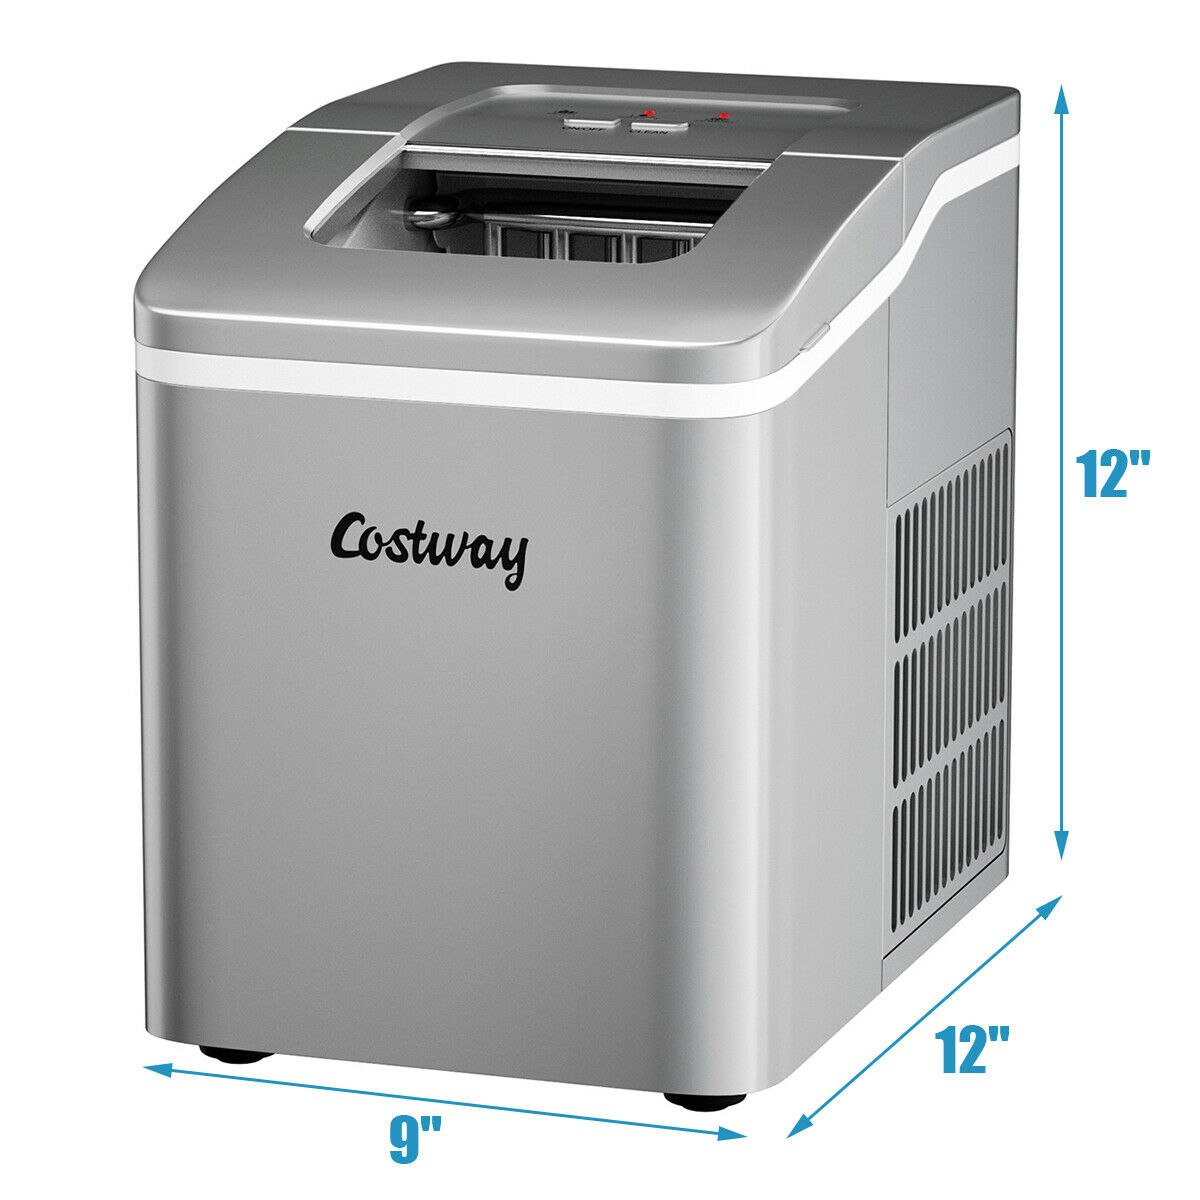 Costway Portable Ice Maker Machine Countertop 26Lbs/24H Self-cleaning w/ Scoop Silver